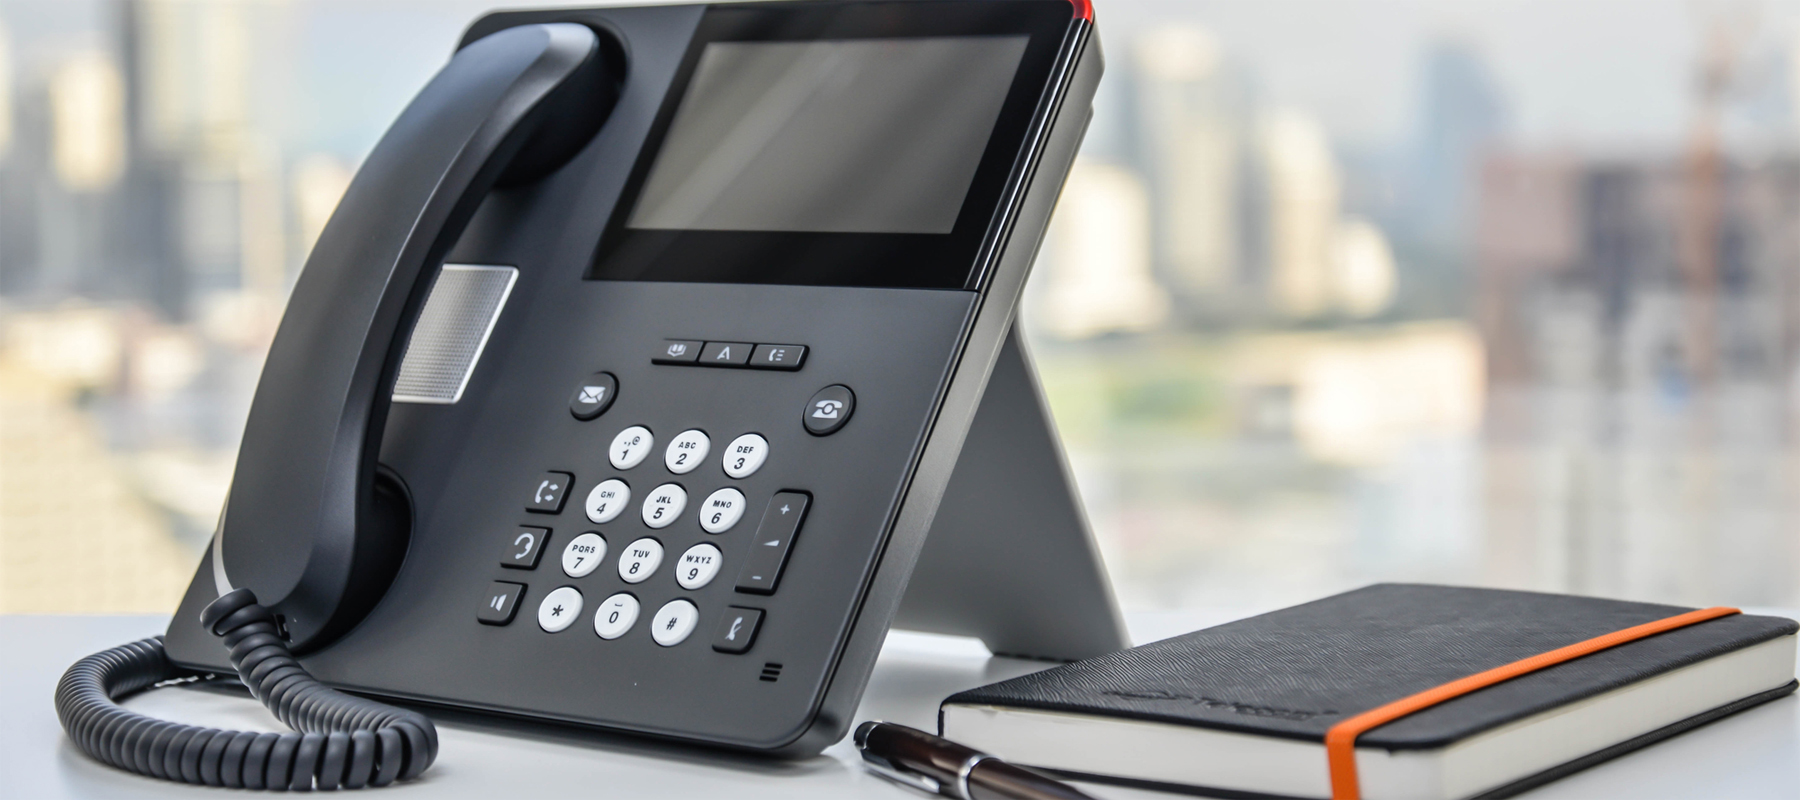 A PBX Phone System with Notebook and Pen